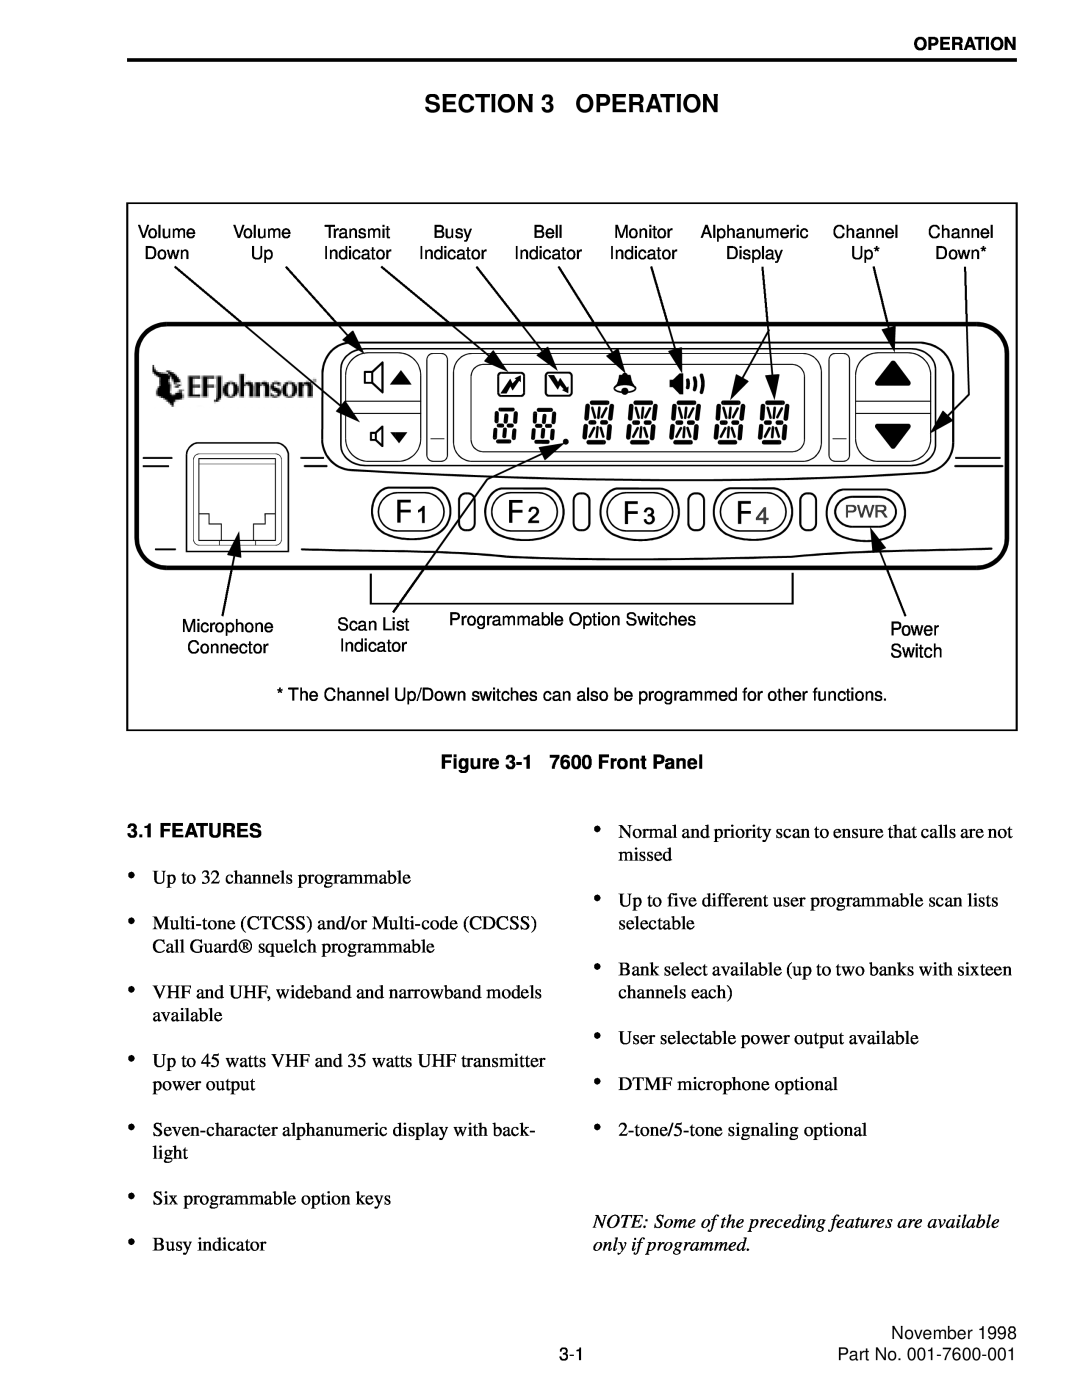 EFJohnson 764X, 761X service manual Operation, 17600 Front Panel, Features 